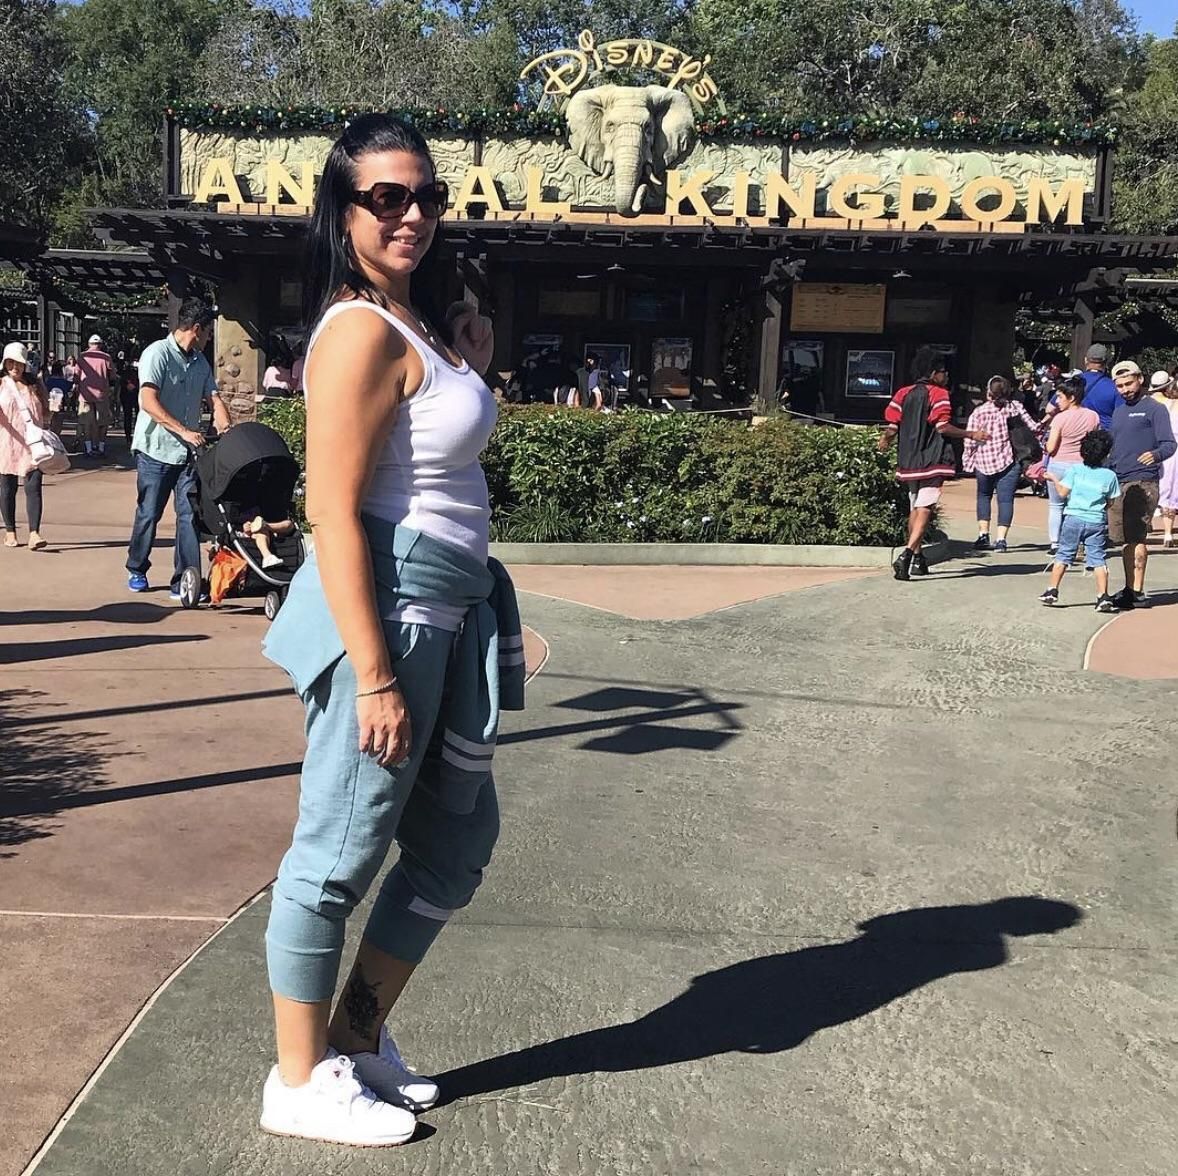 I made my mom stand in the perfect spot for our trip to Disney